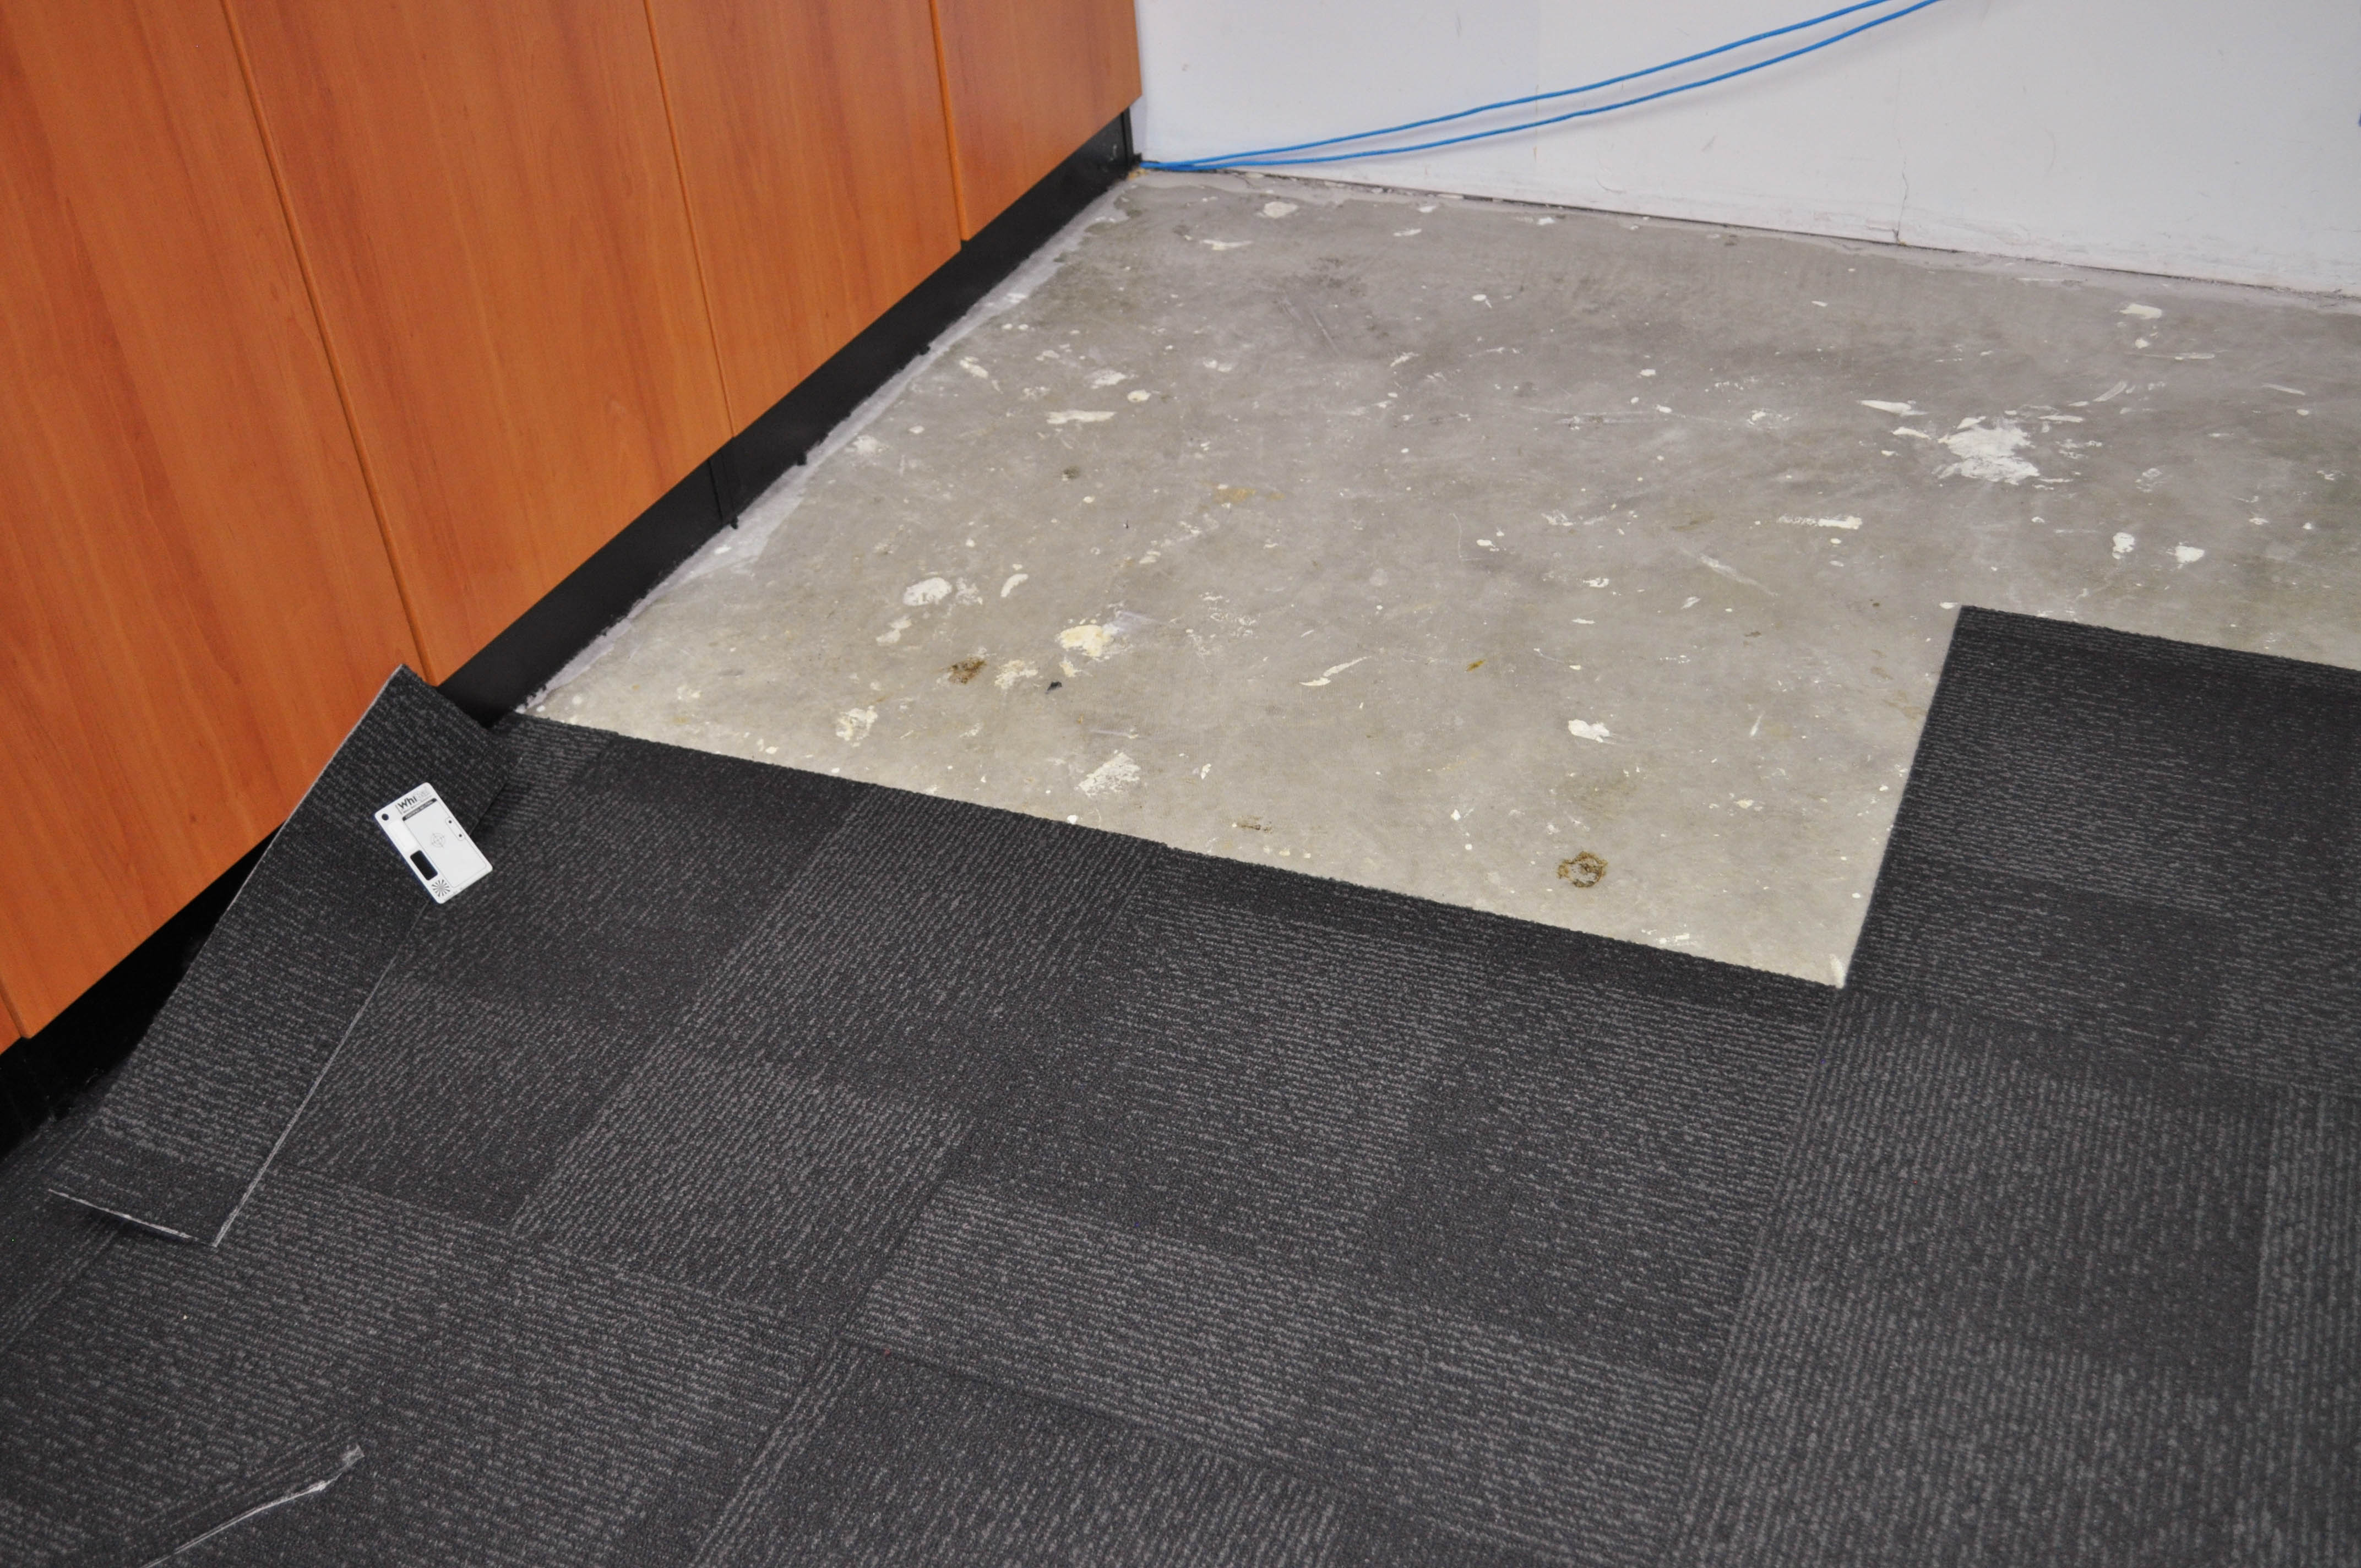 patterned, charcoal colored, carpet tile sample of the Jalan range sold and installed by Concord Floors.